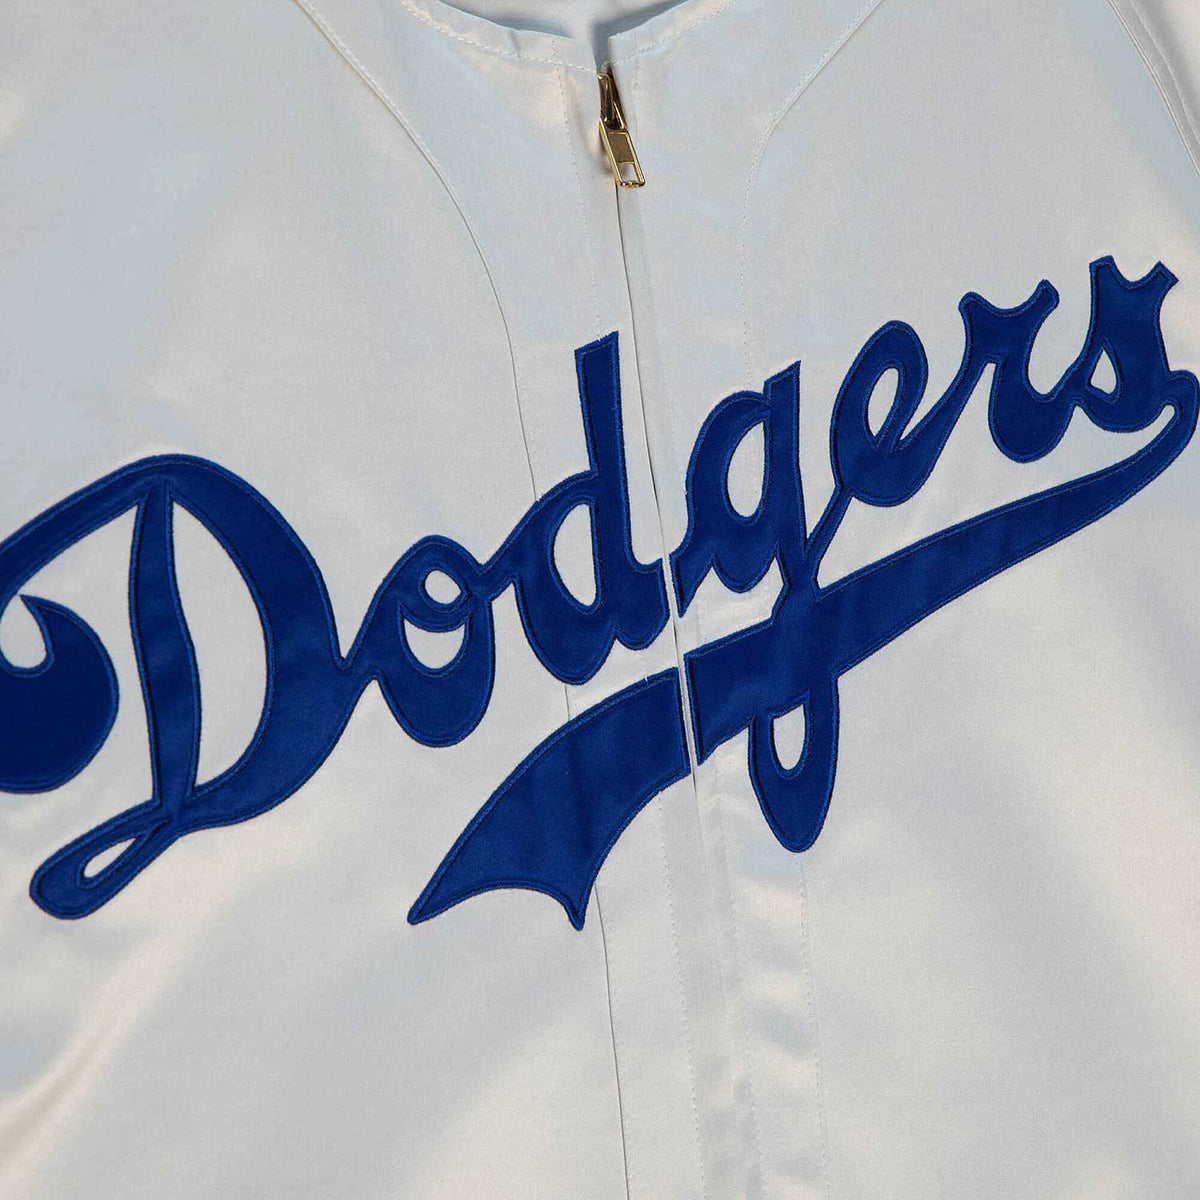 Authentic Dodgers Gold Trim Jersey Review 